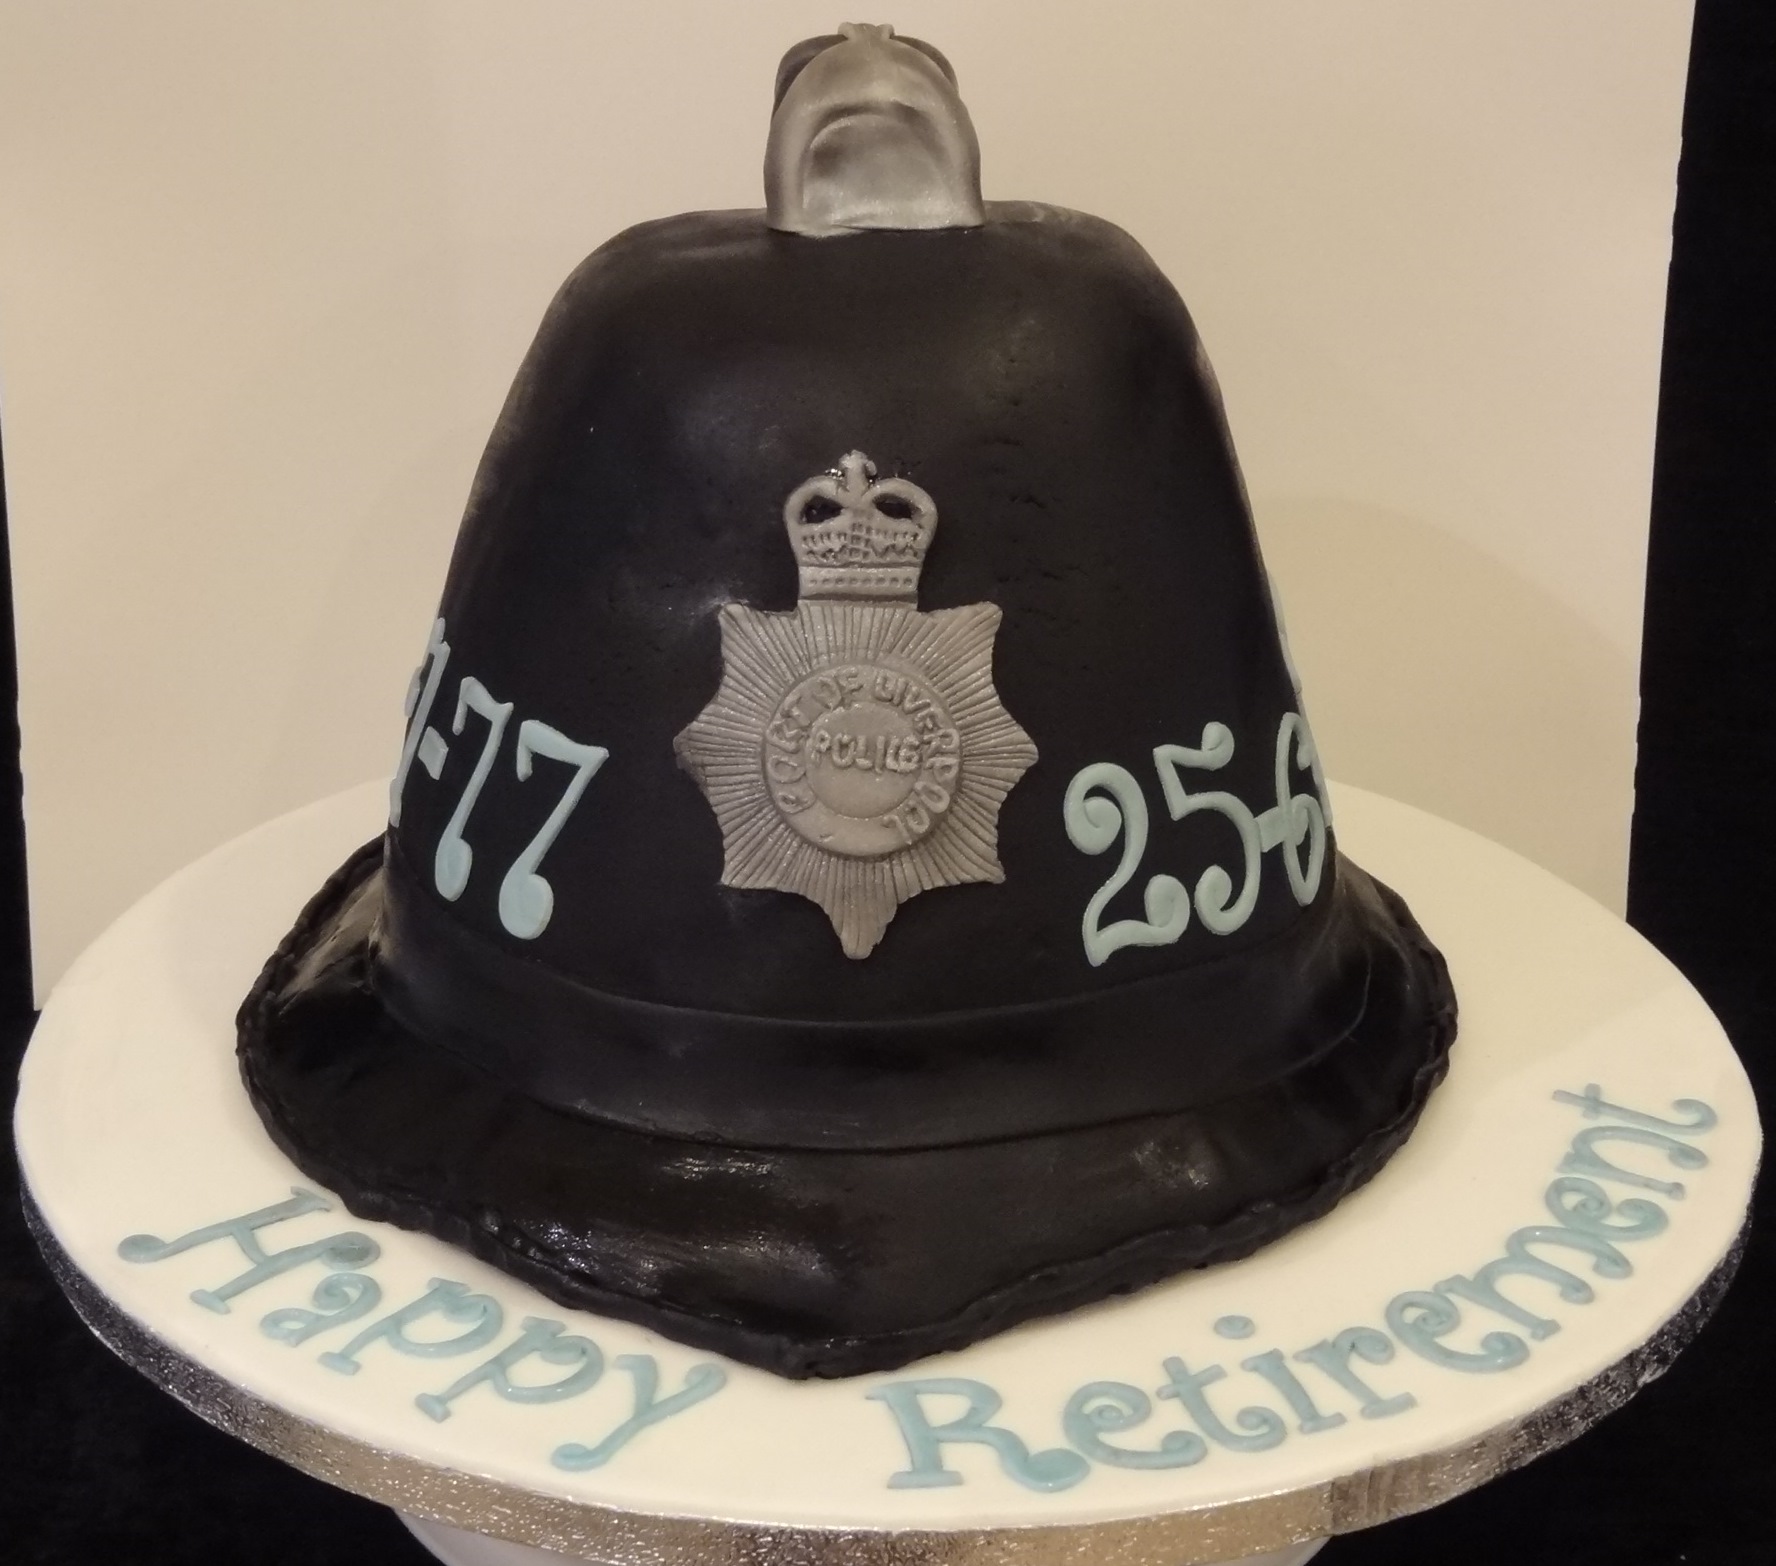 Funny Police Retirement Cakes